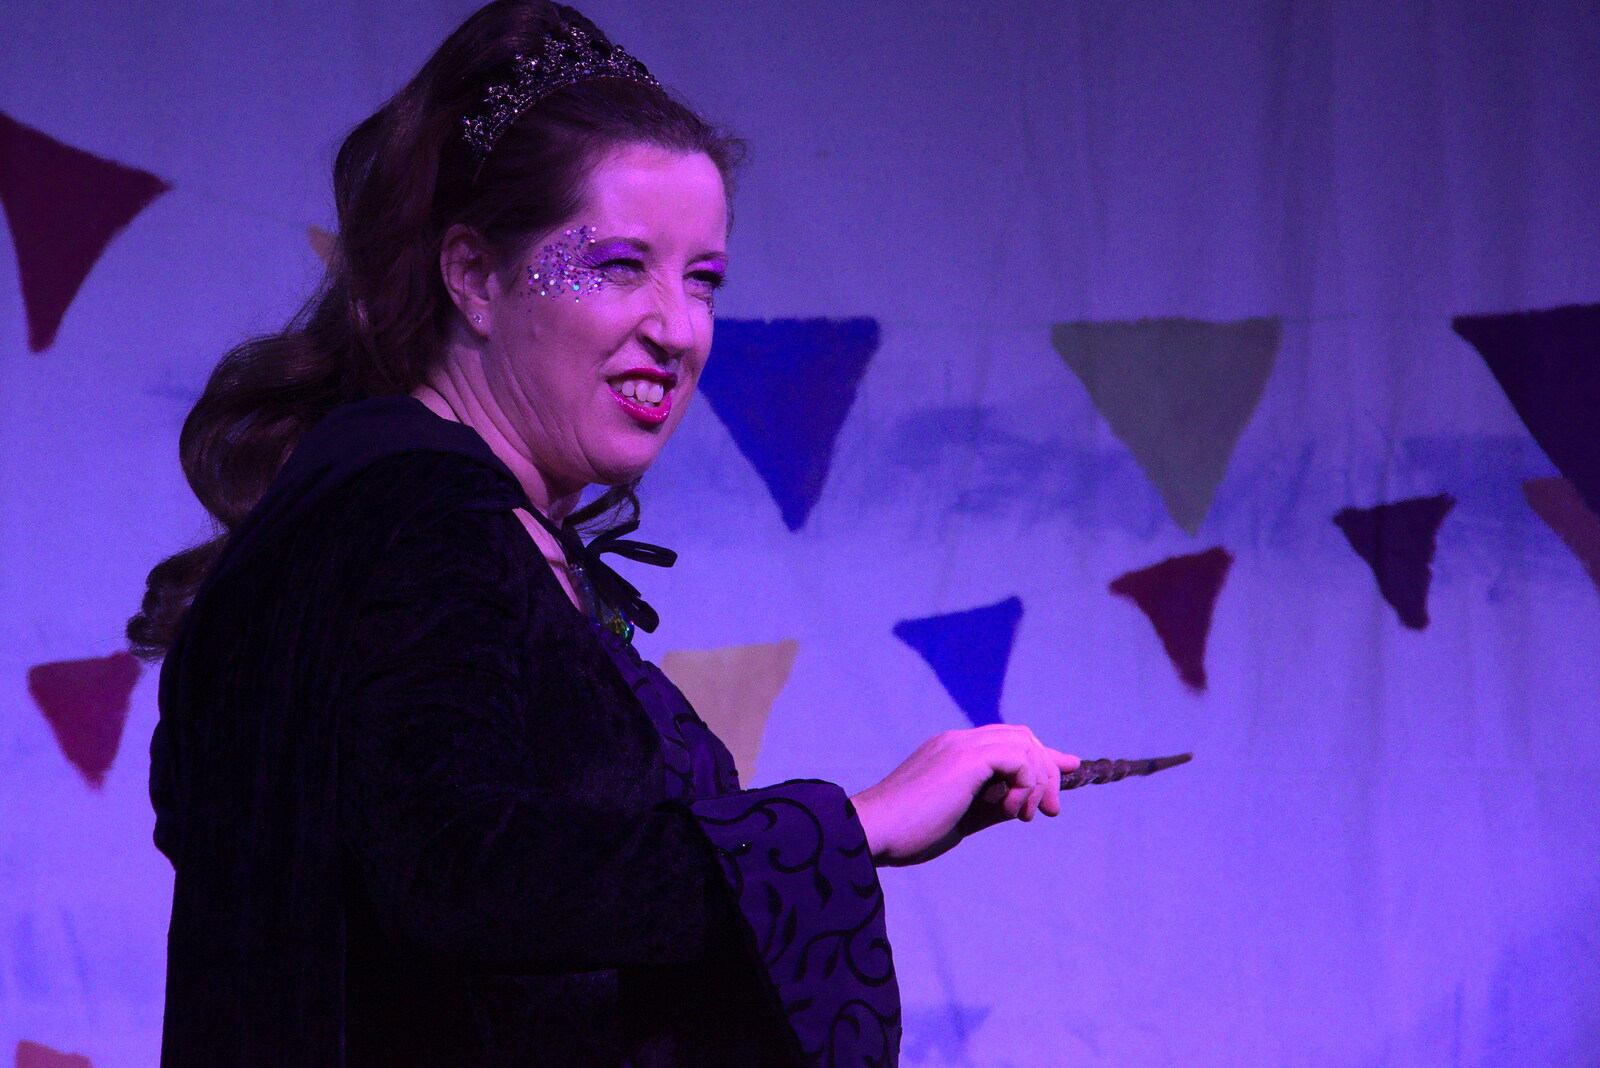 Suzanne plays an evil witch from Dove Players' Trouble in Pantoland, Eye Community Centre, Suffolk - 11th December 2021